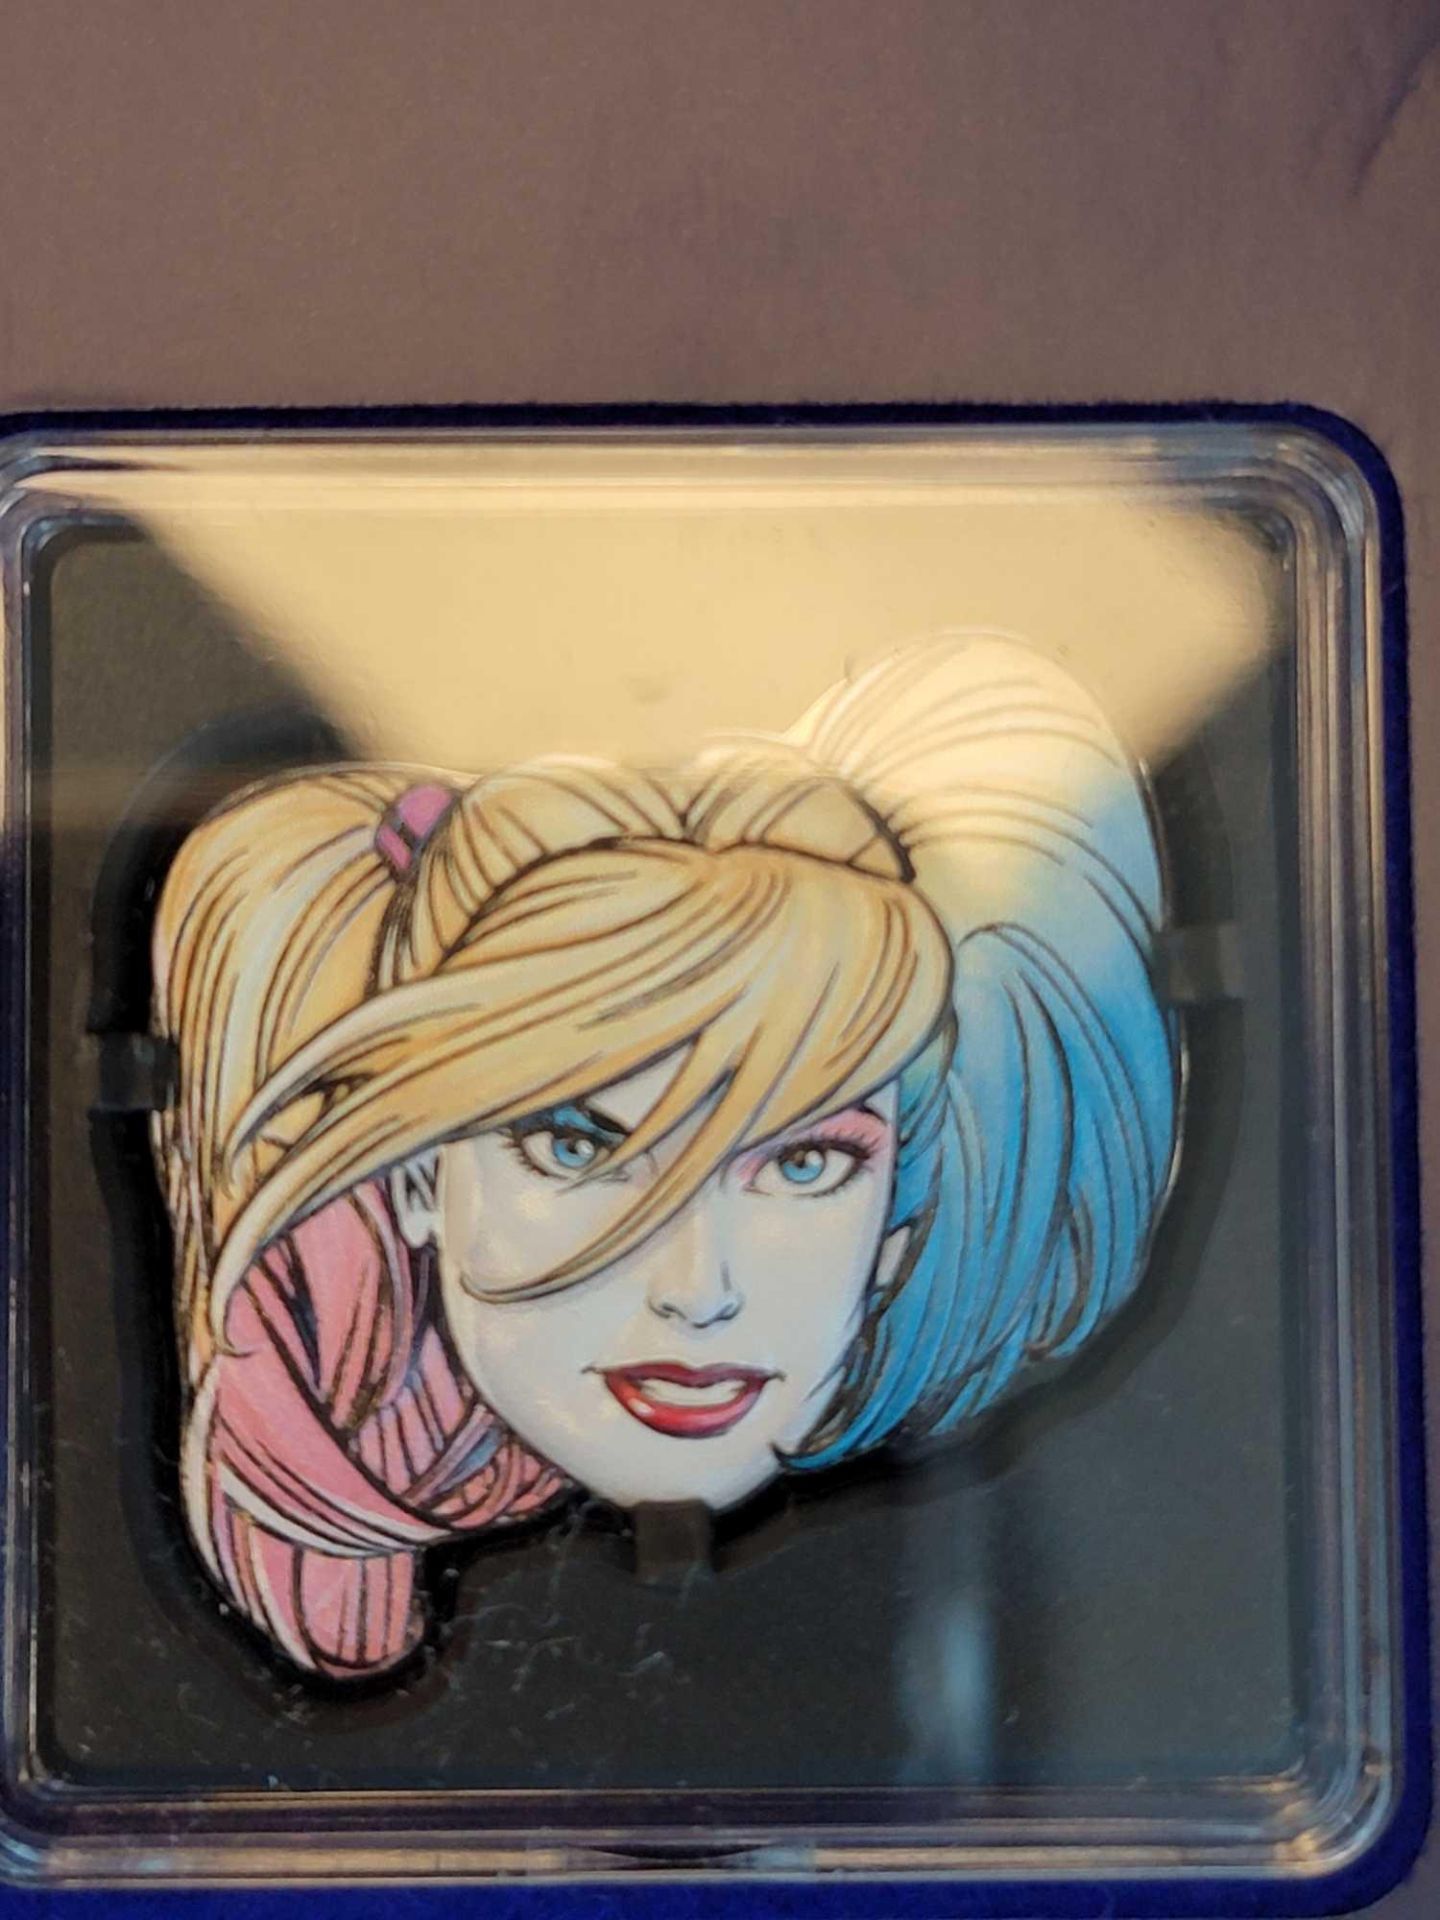 Faces of Gotham - Harley Quinn 1 oz Silver Collectible Coin - Image 4 of 12